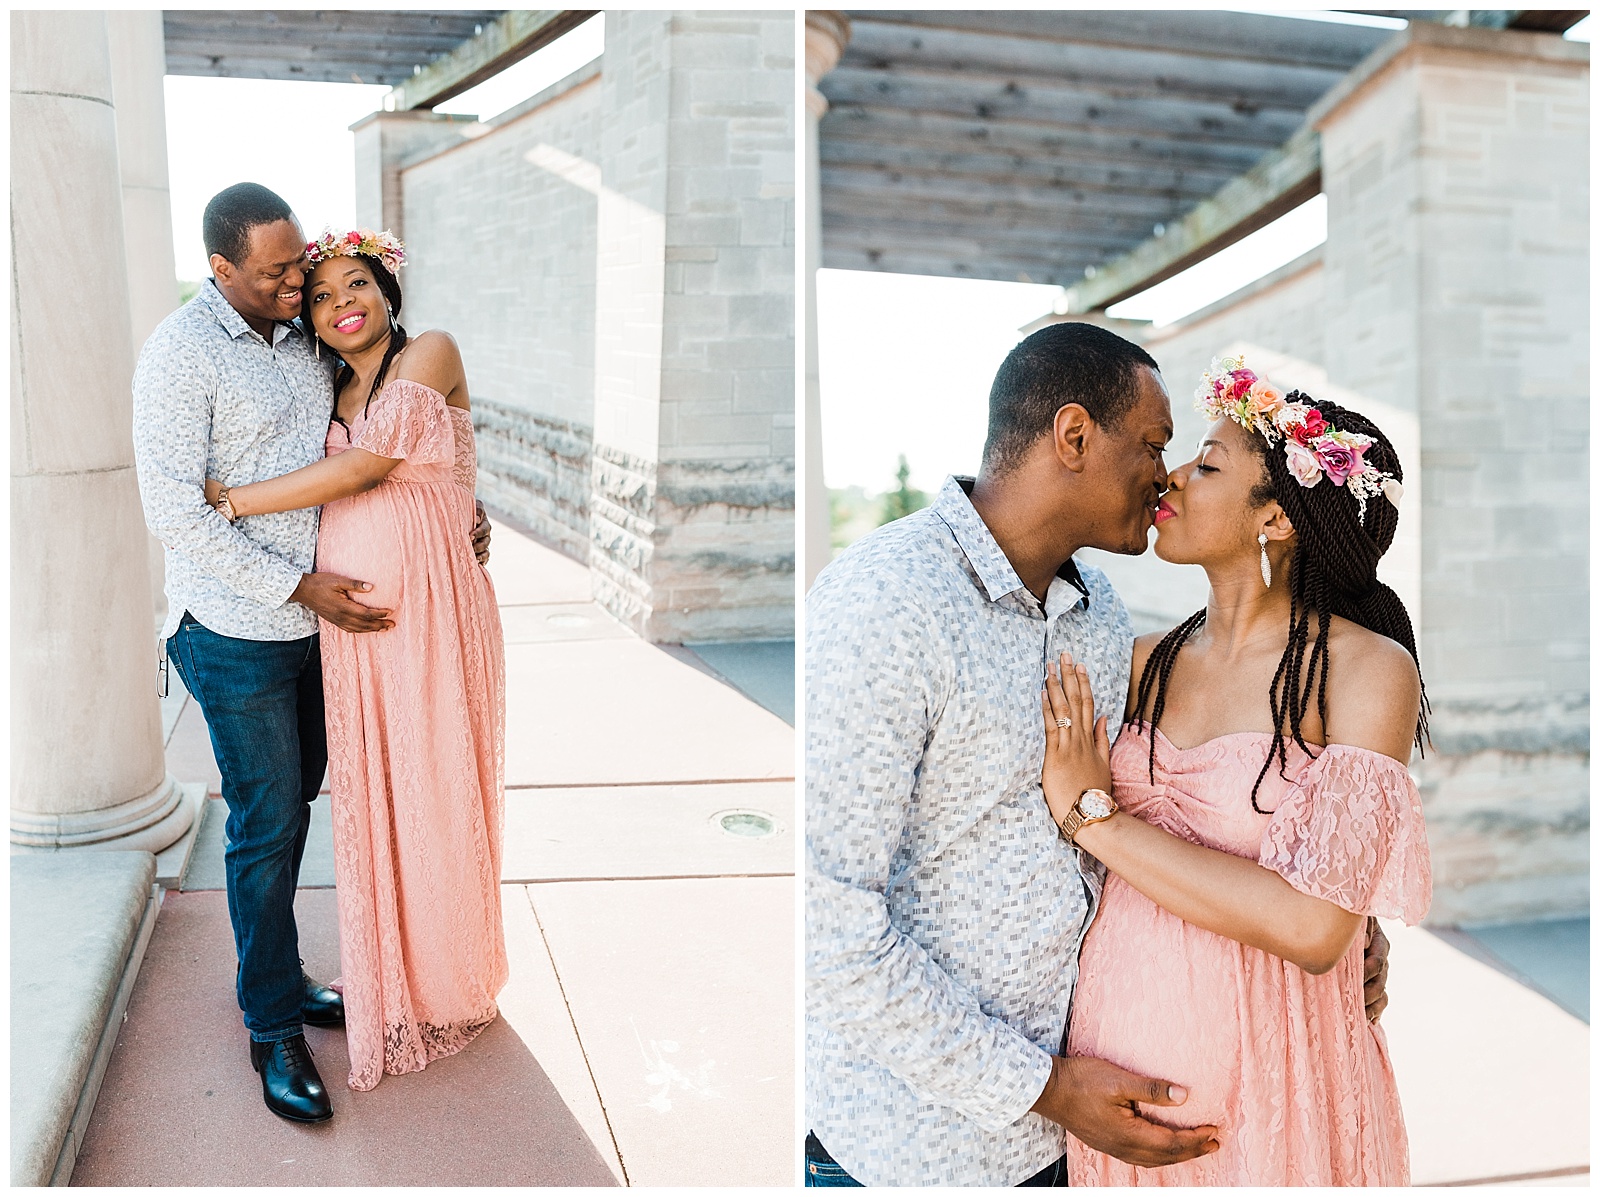 Indianapolis photographer, Indiana photographer, Maternity Session, Leah Rife Photo, Lace Maternity Dress, Maternity outfit ideas, Coxhall Gardens, Indianapolis Maternity Session, Indiana Lifestyle Photographer, Indianapolis family photographer